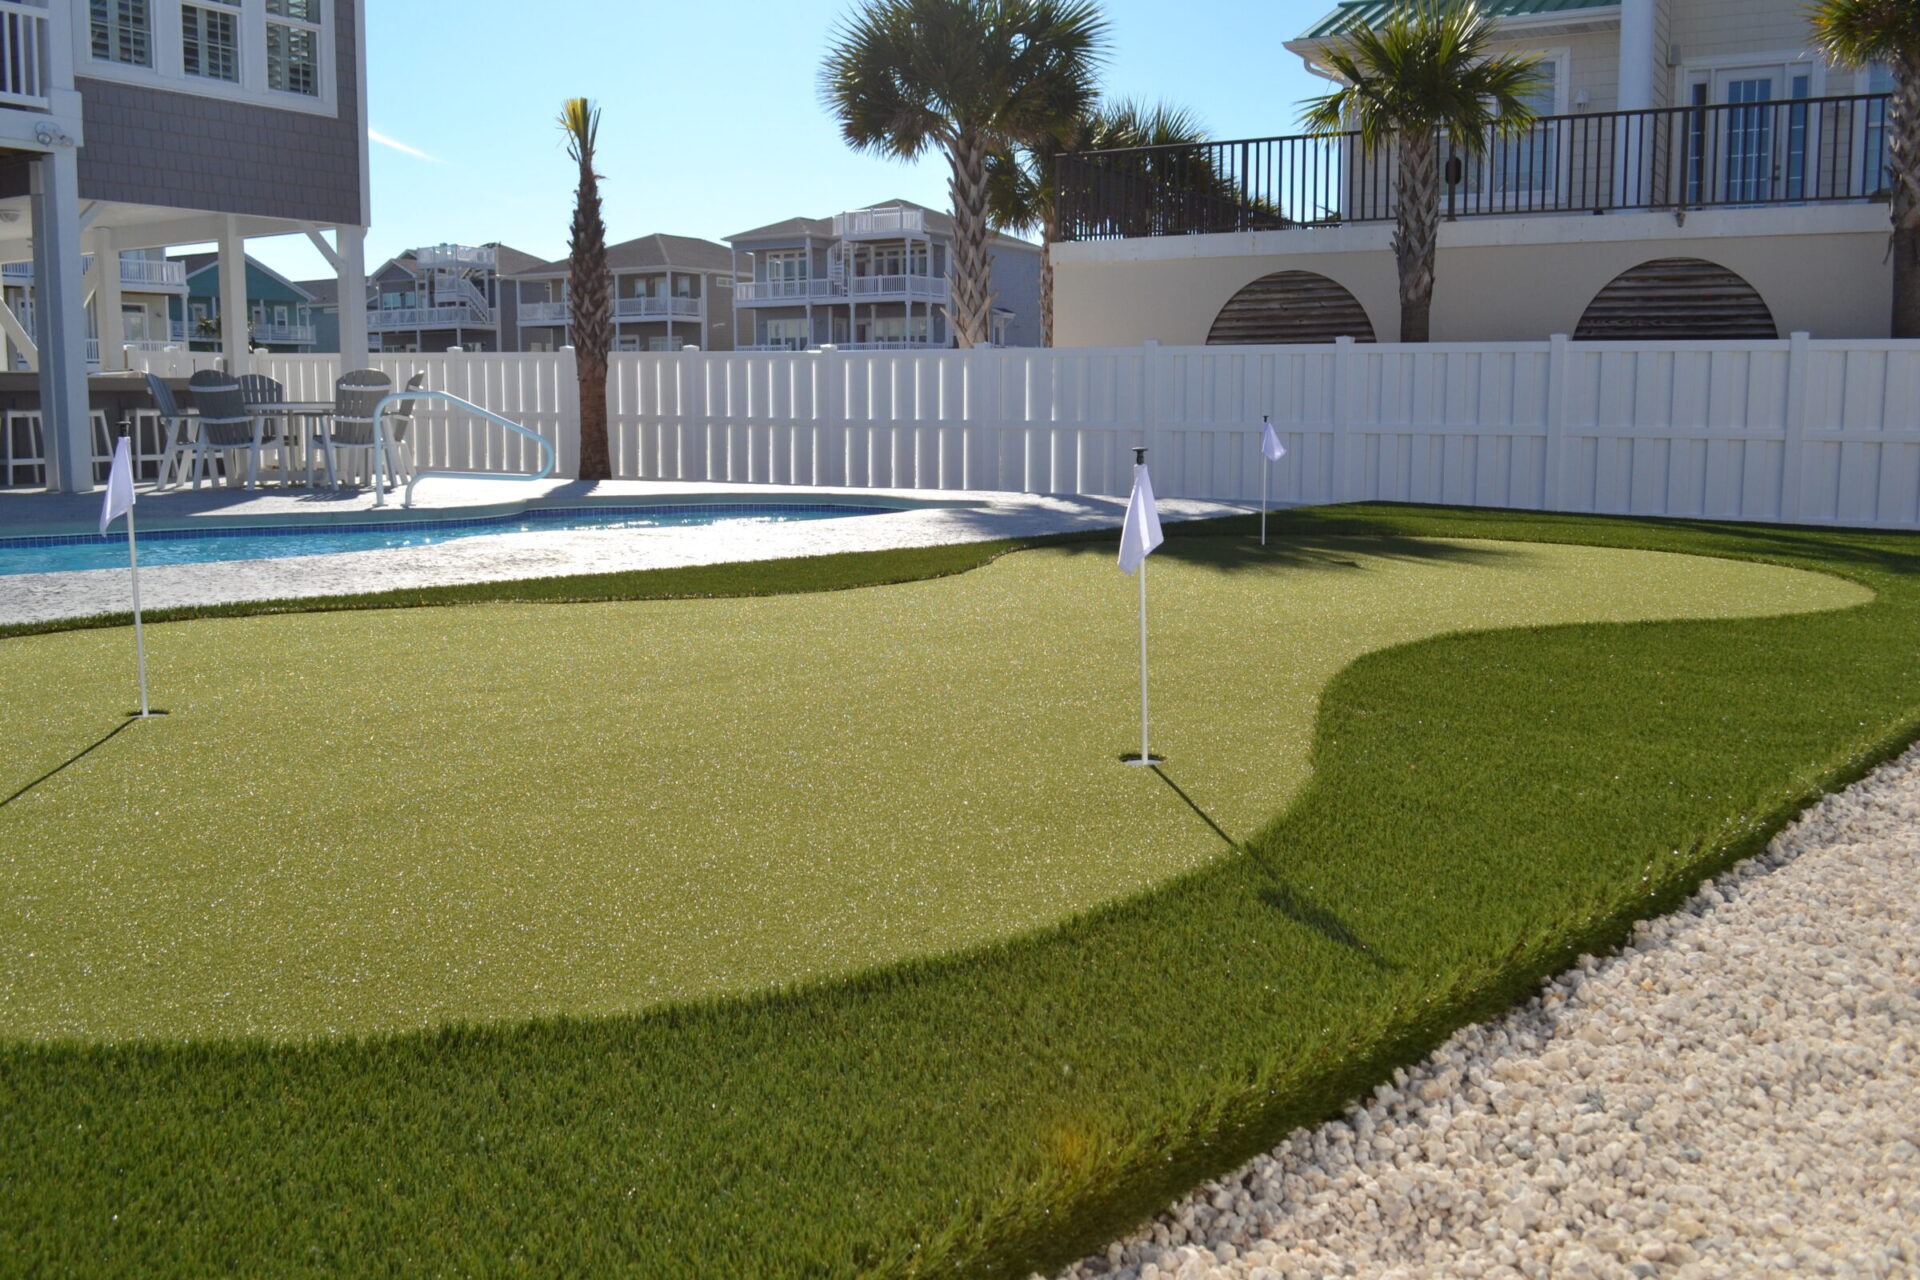 A backyard putting green with two holes, adjacent to a swimming pool, surrounded by a white fence, under a clear blue sky. No people visible.